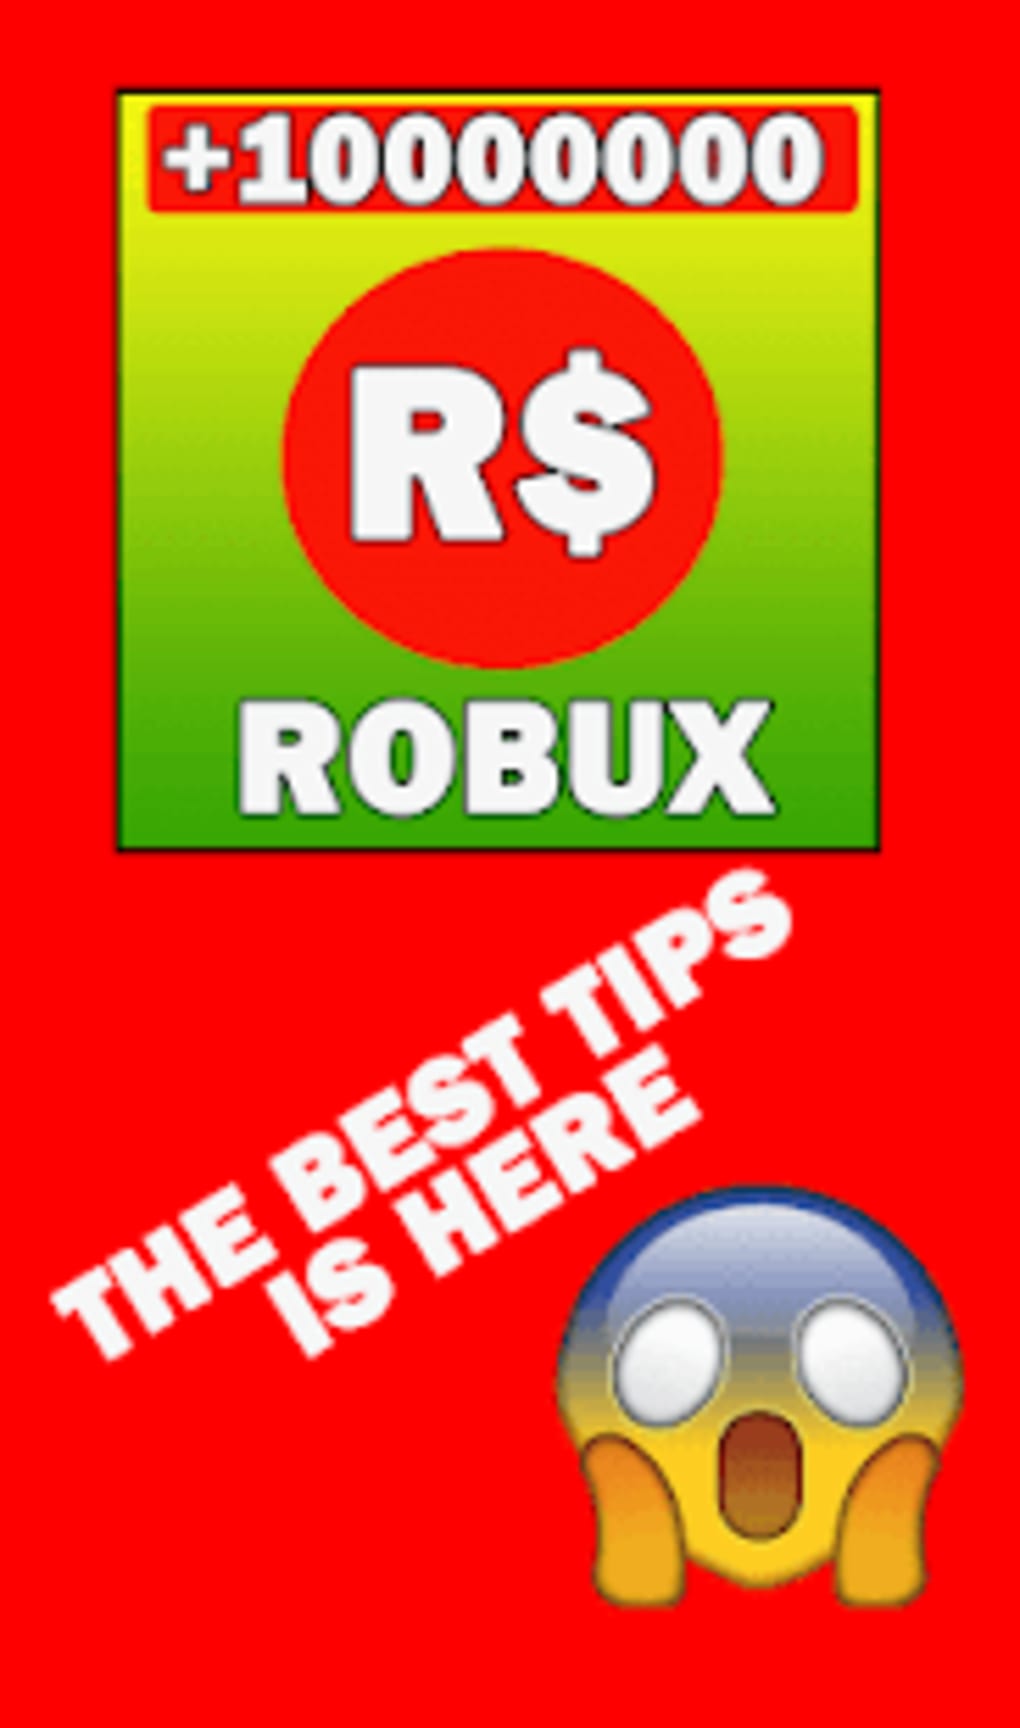 Get Free Robux Tips Get Robux Free 2k19 Para Android - how long does it take to recieve robux